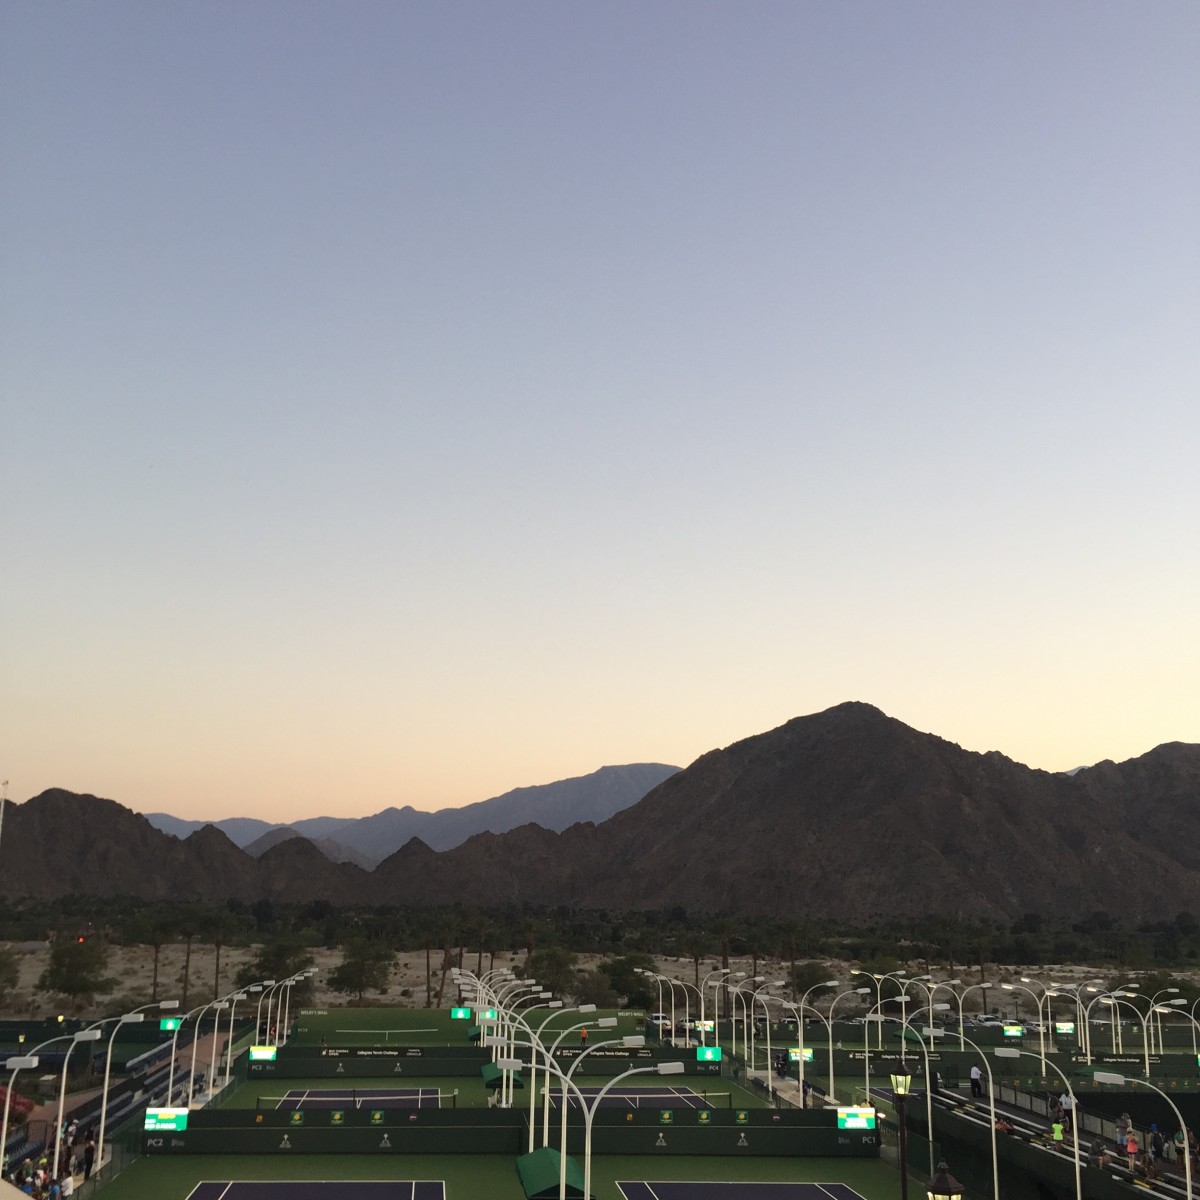 The view across the practice courts at Indian Wells